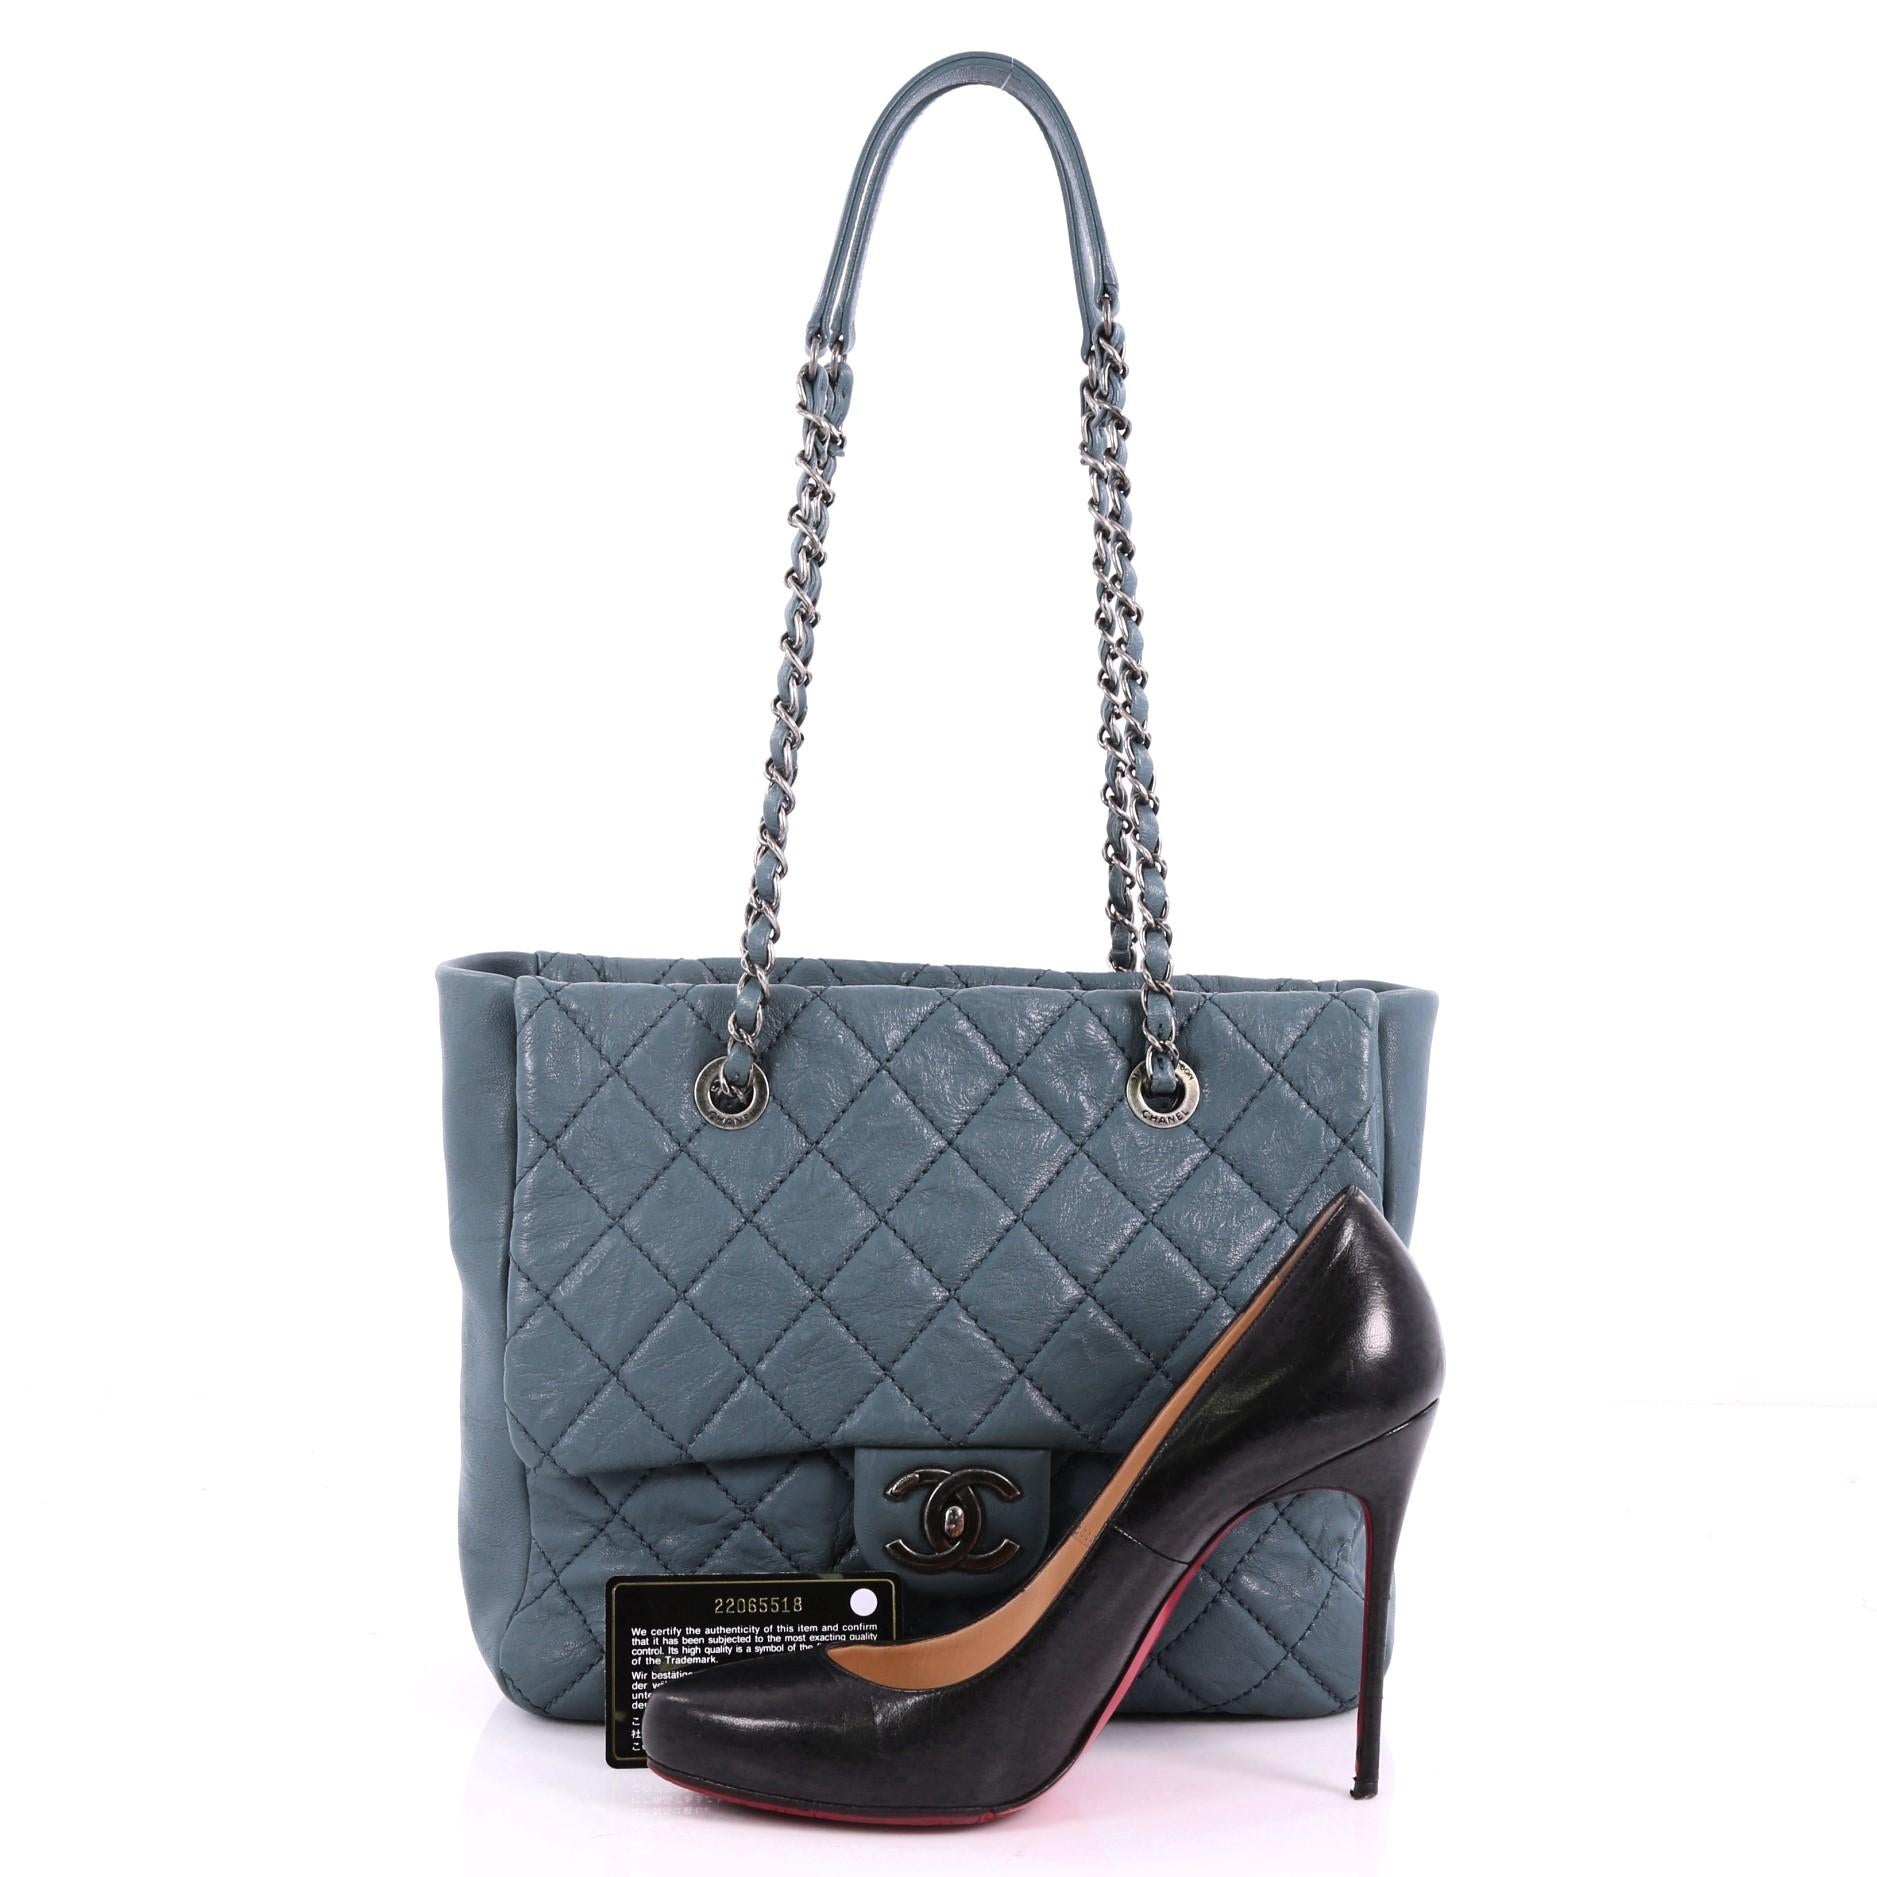 This authentic Chanel Front Flap Shopping Tote Quilted Washed Lambskin Large is a fashionable and functional everyday bag. Crafted in blue quilted washed lambskin leather, this glamorous tote features chain-link shoulder straps with leather pads, CC